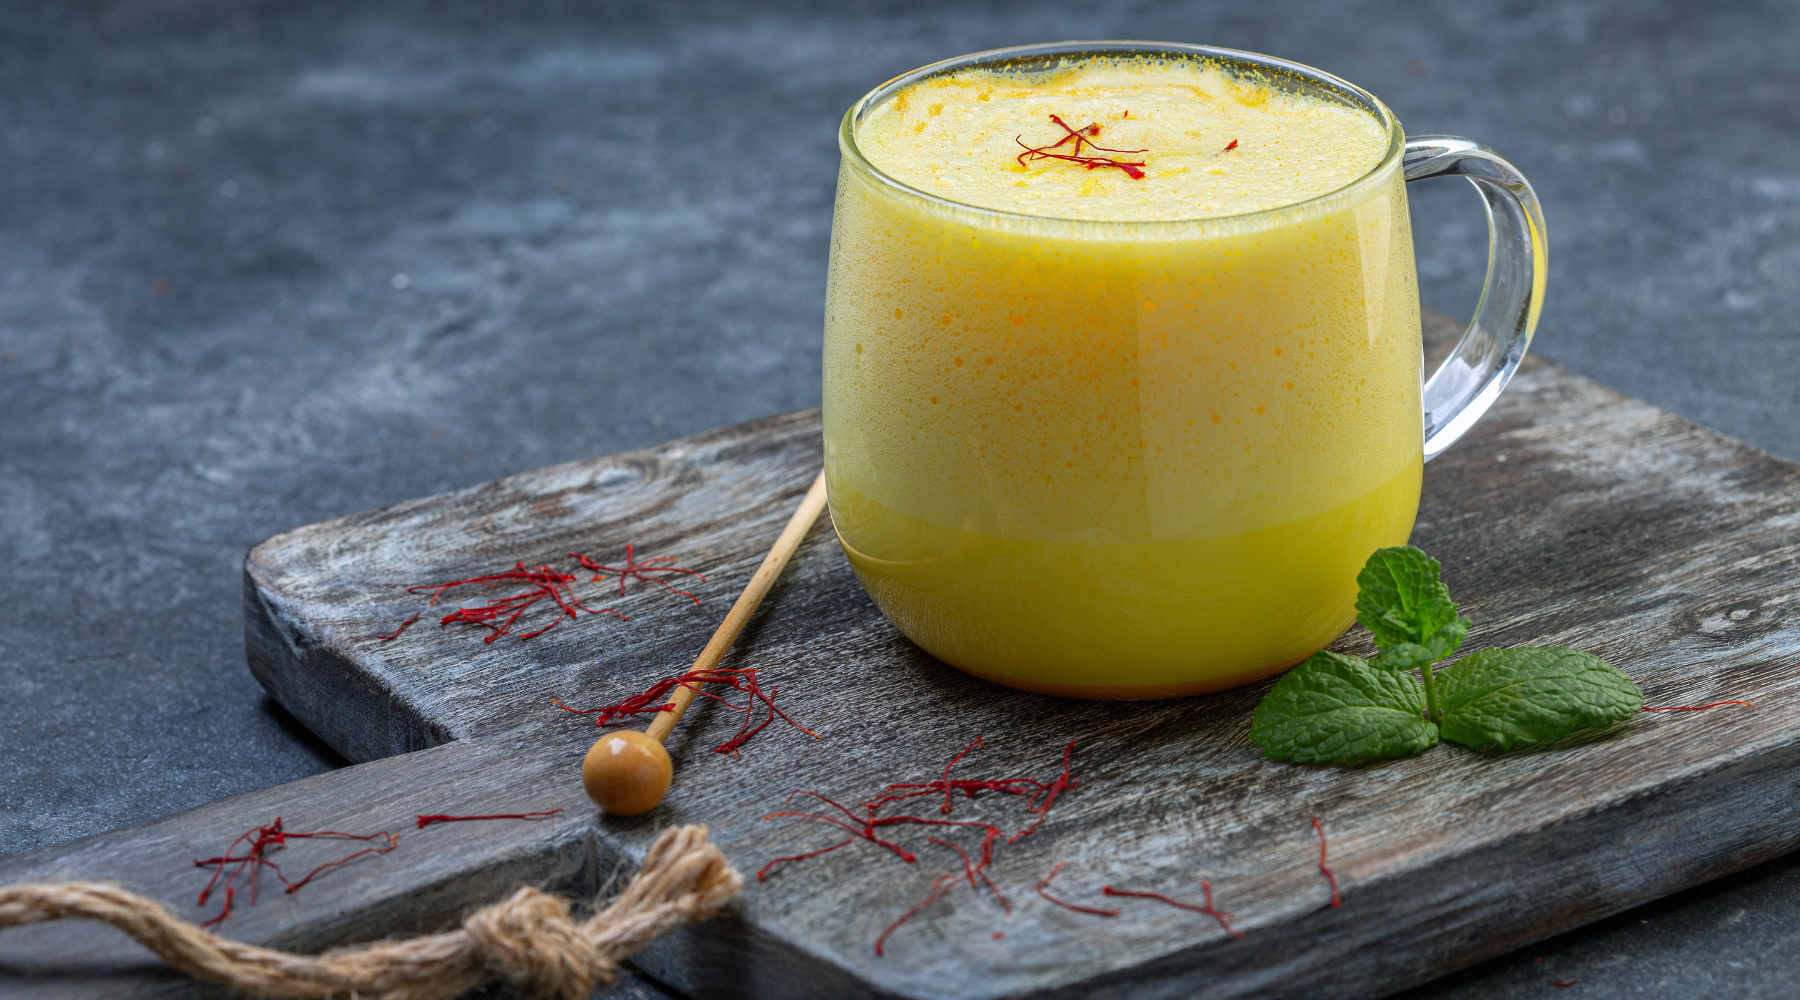 A glass of saffron milk, a yellow drink, placed on a wooden board.